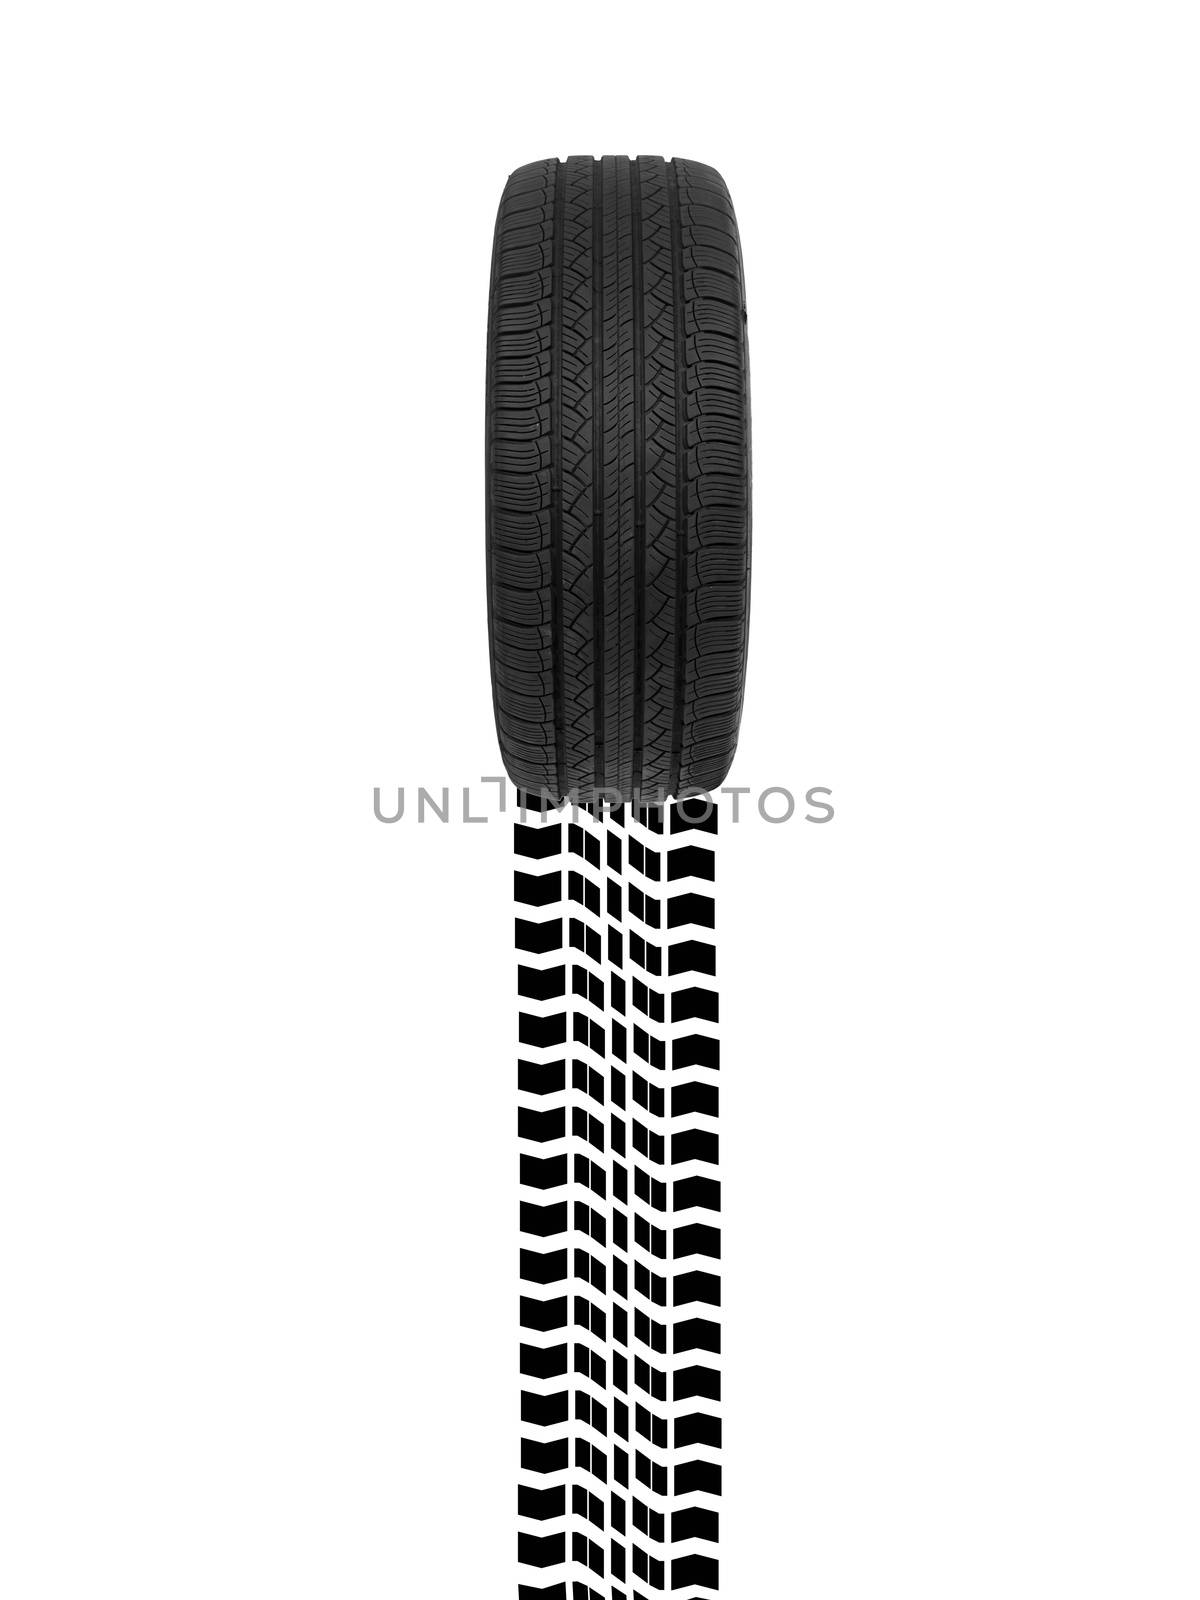 Tyre track isolated against a white background